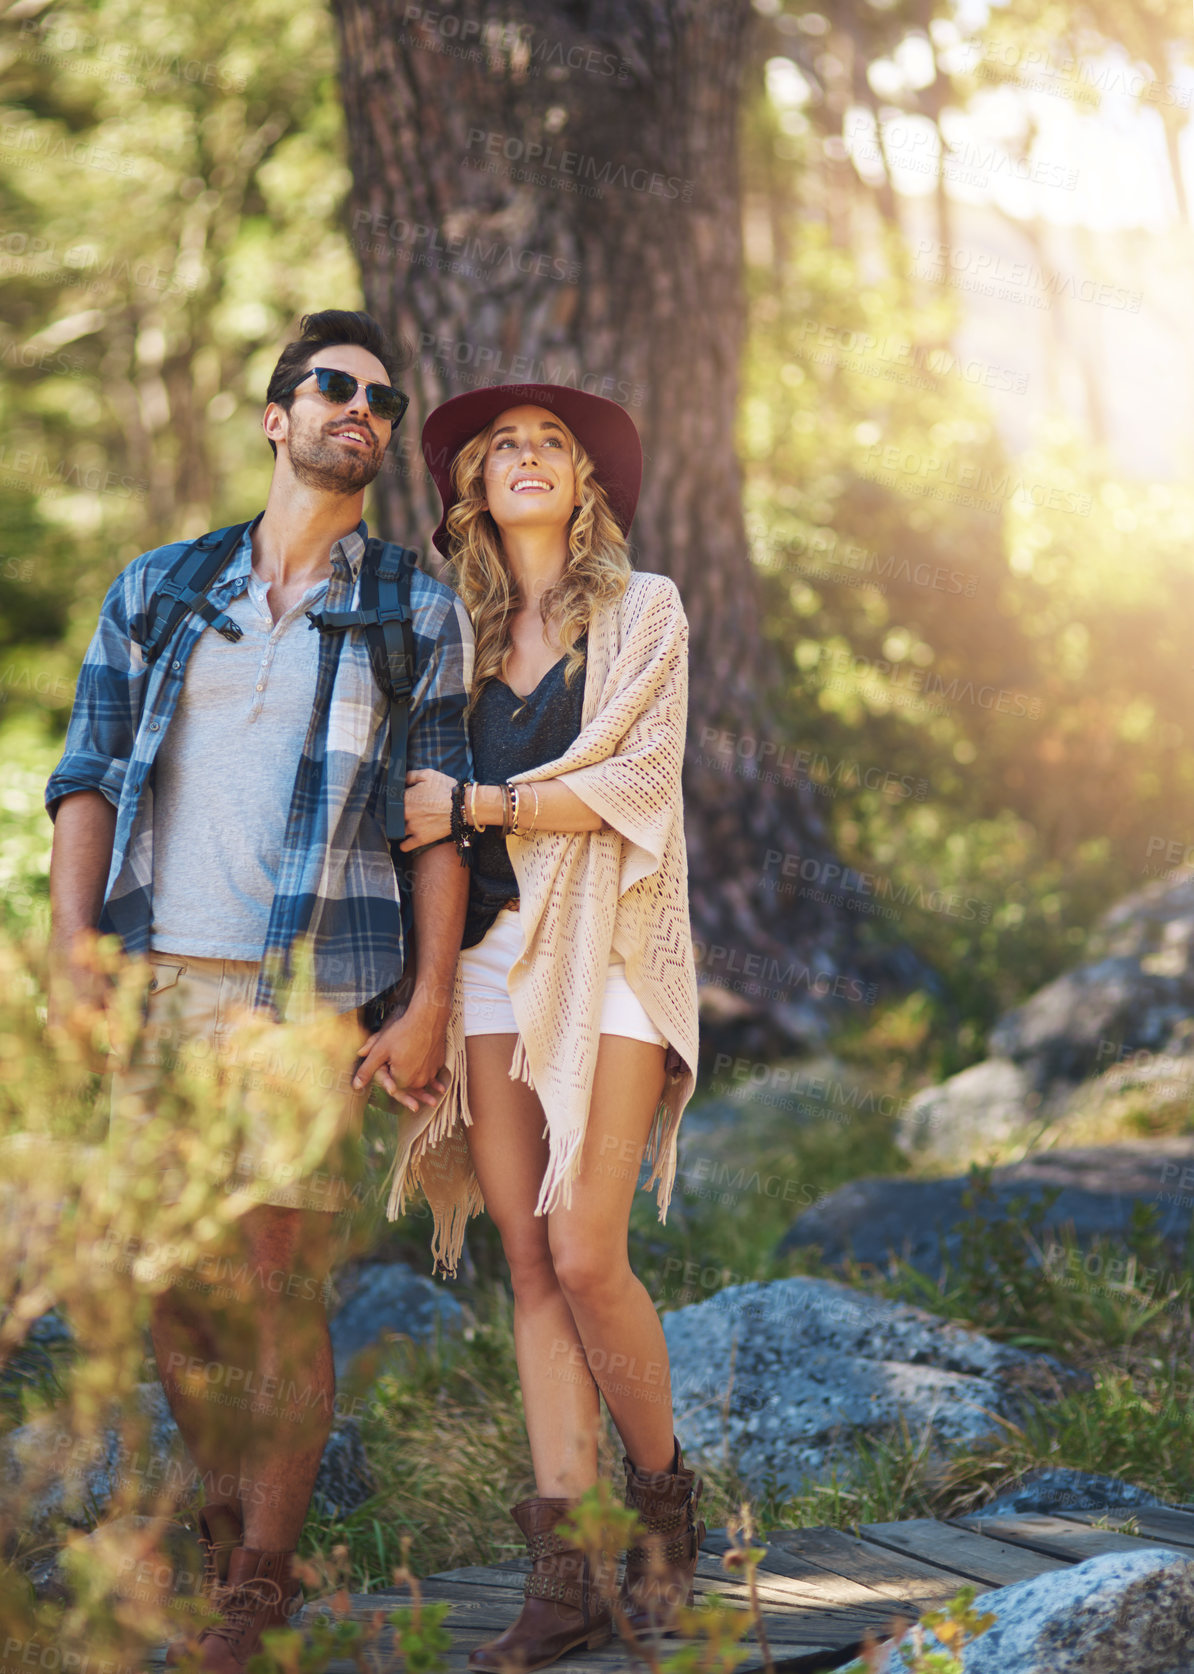 Buy stock photo Full length shot of an affectionate young couple during a hike